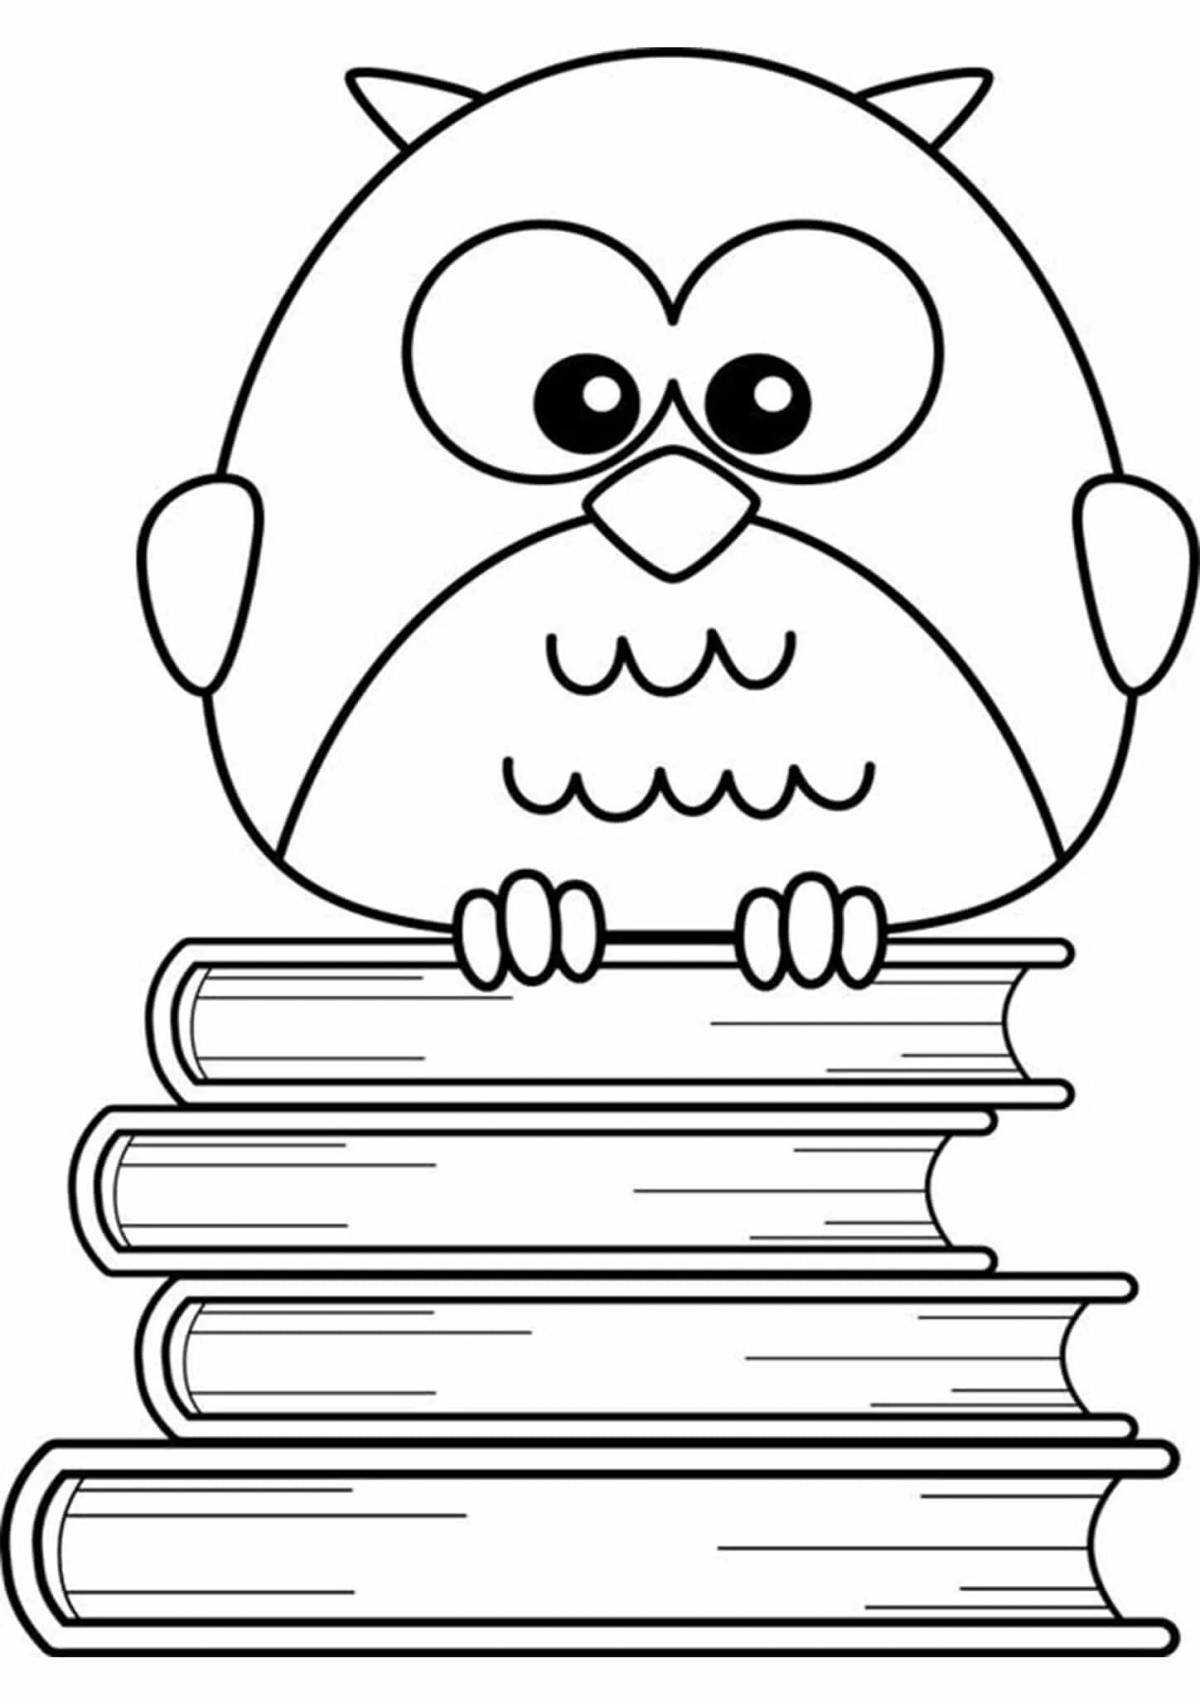 Awesome smart owl coloring page for kids